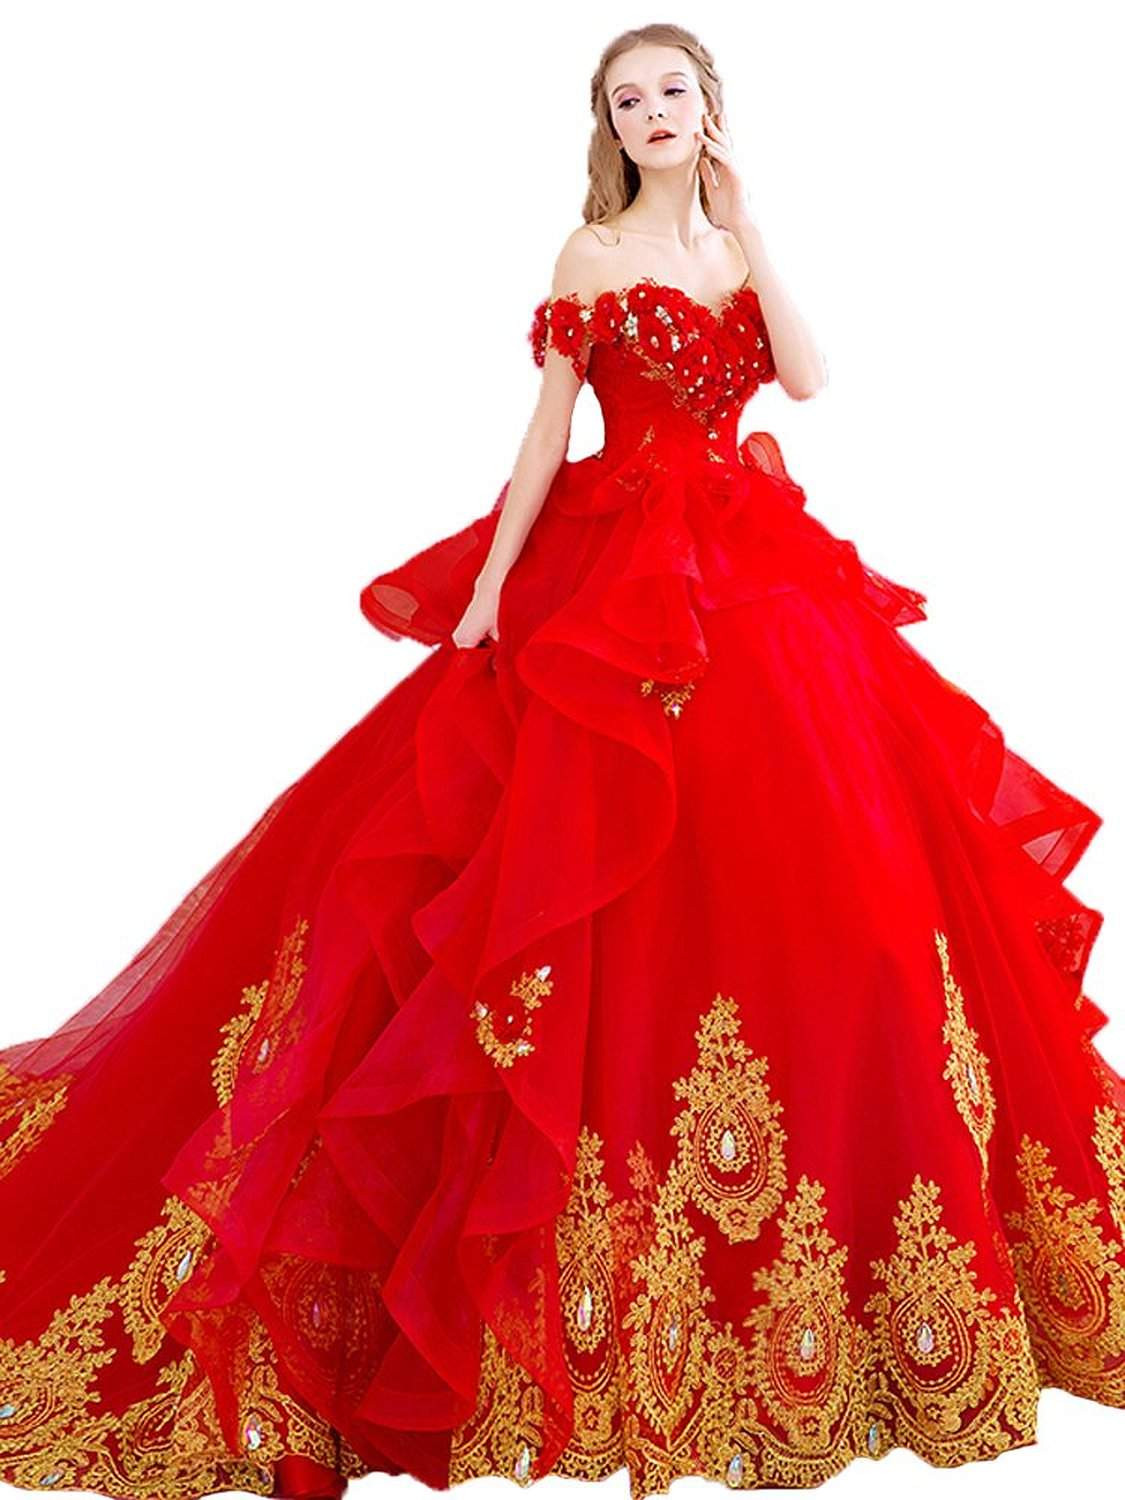 Red Wedding Gowns
 Top 25 Best Red Wedding Dresses